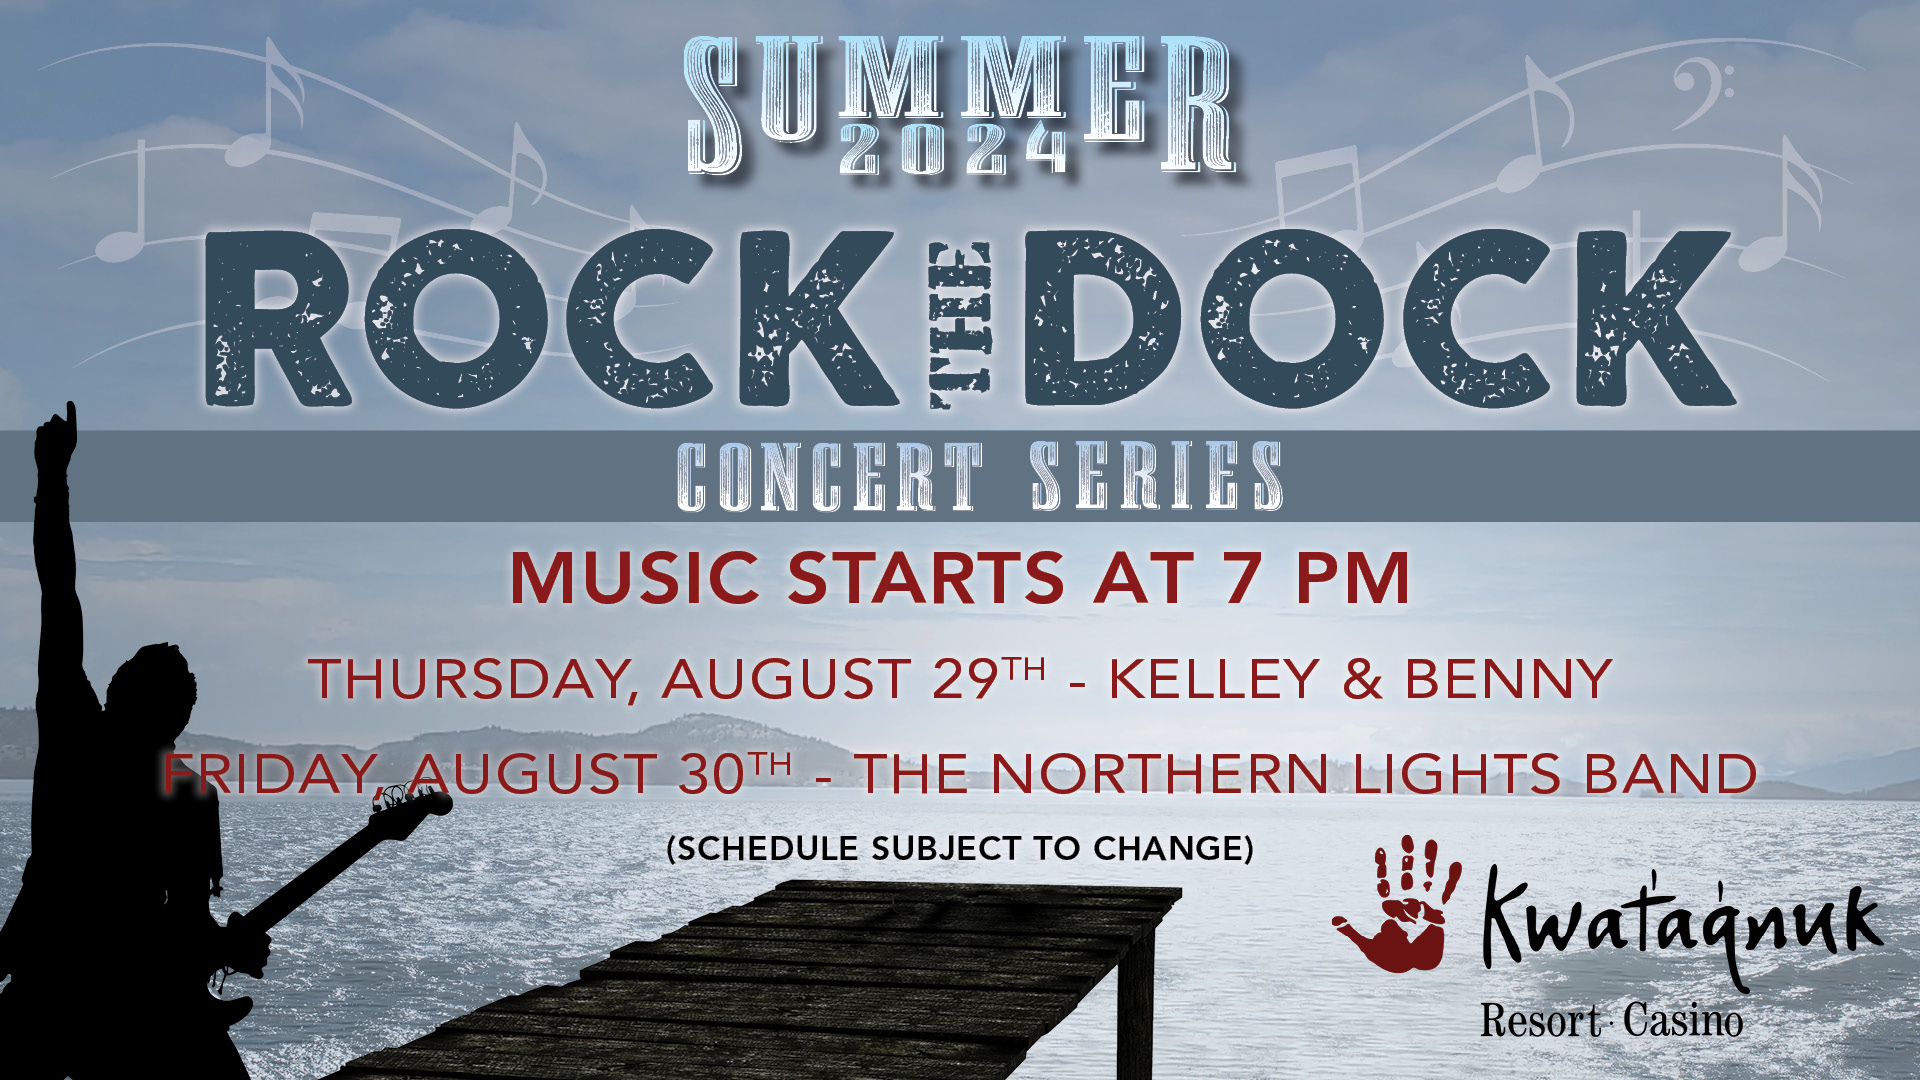 Rock the Dock, Kwataqnuk, Summer Concert Series, Summer Concert, Live music, free event, local event, free local event, Kelley & Benny, The Northern Lights Band, rockin the dock rock the docks,